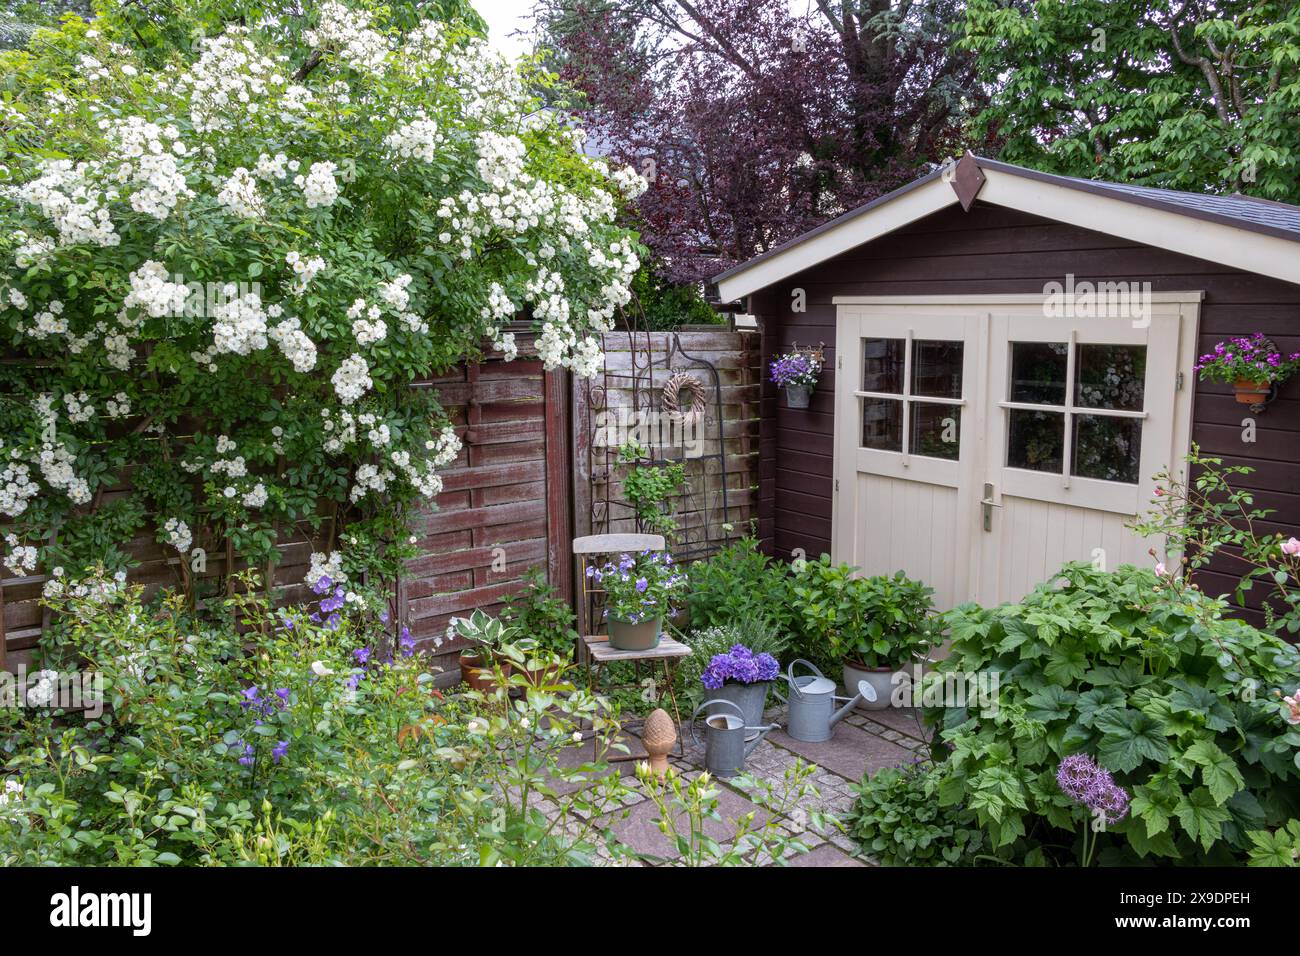 garden scene in early summer with white climbing rose Guirlande d'Amour, garden house and plants in pots Stock Photo